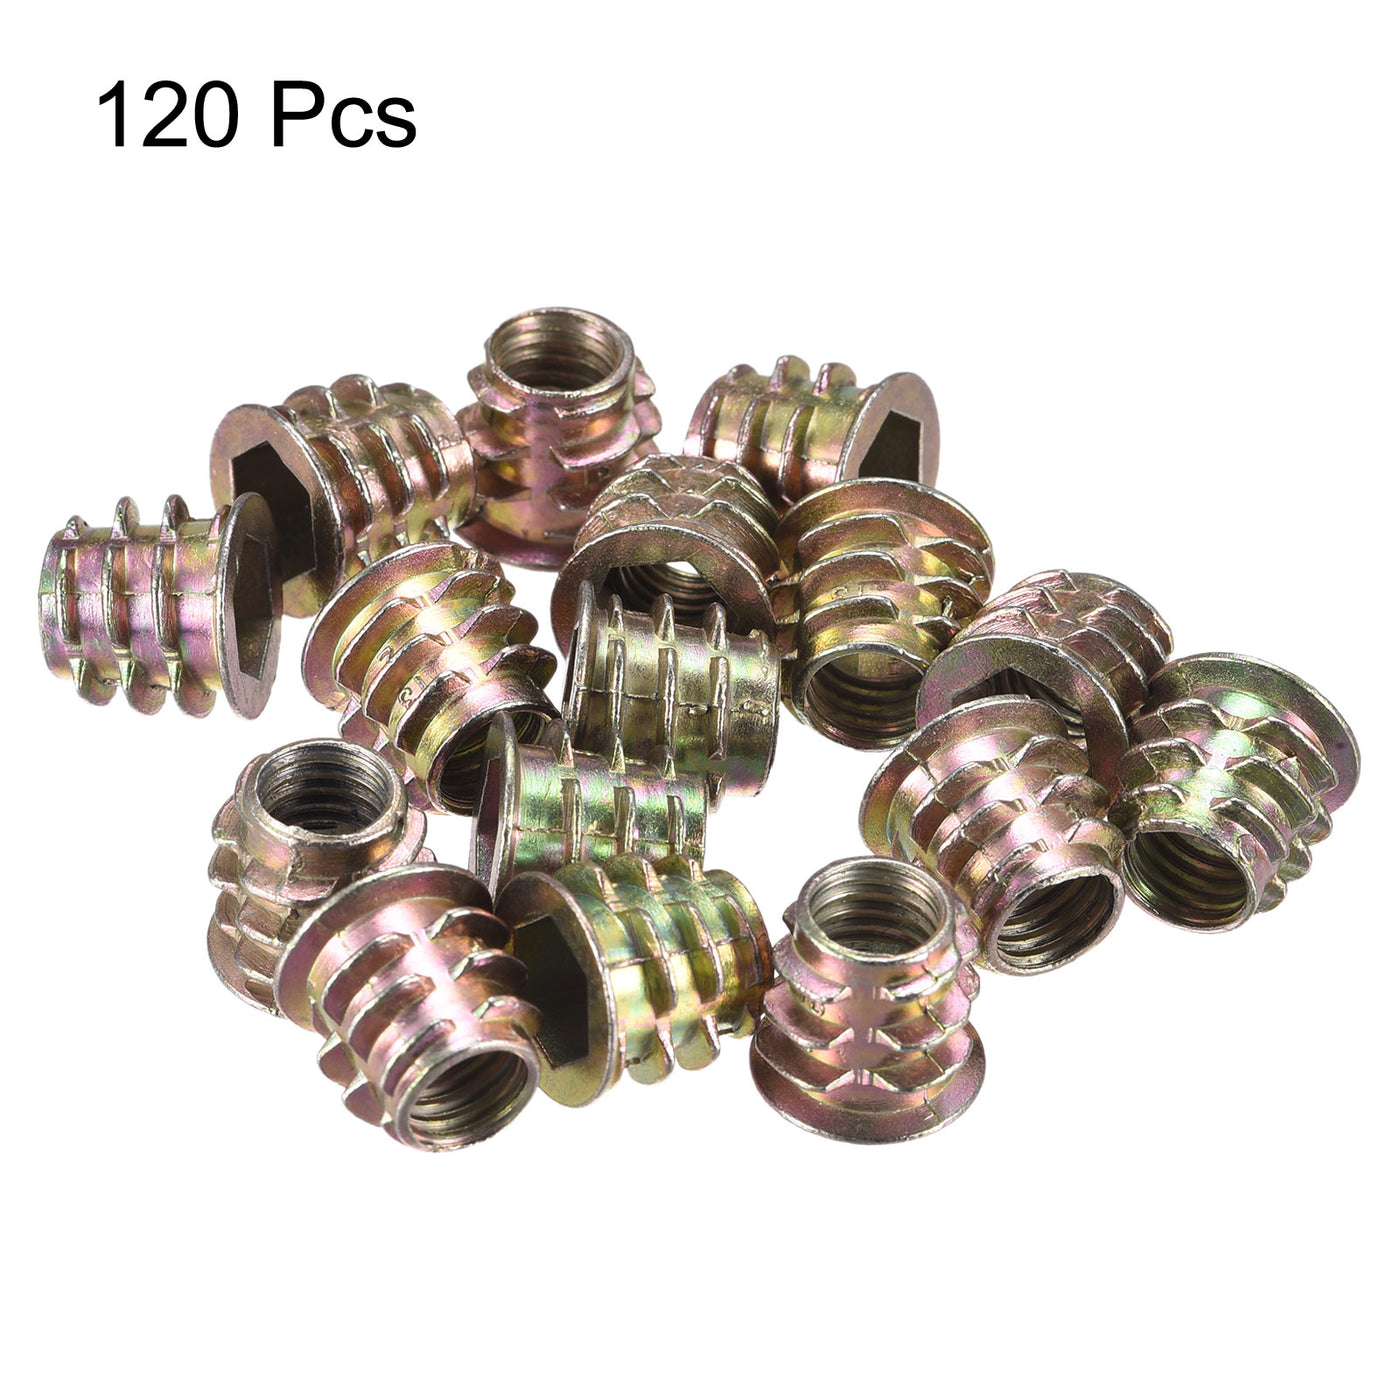 uxcell Uxcell Furniture Screw-in Nut, Zinc Alloy Threaded Insert Nuts Hardware Nuts